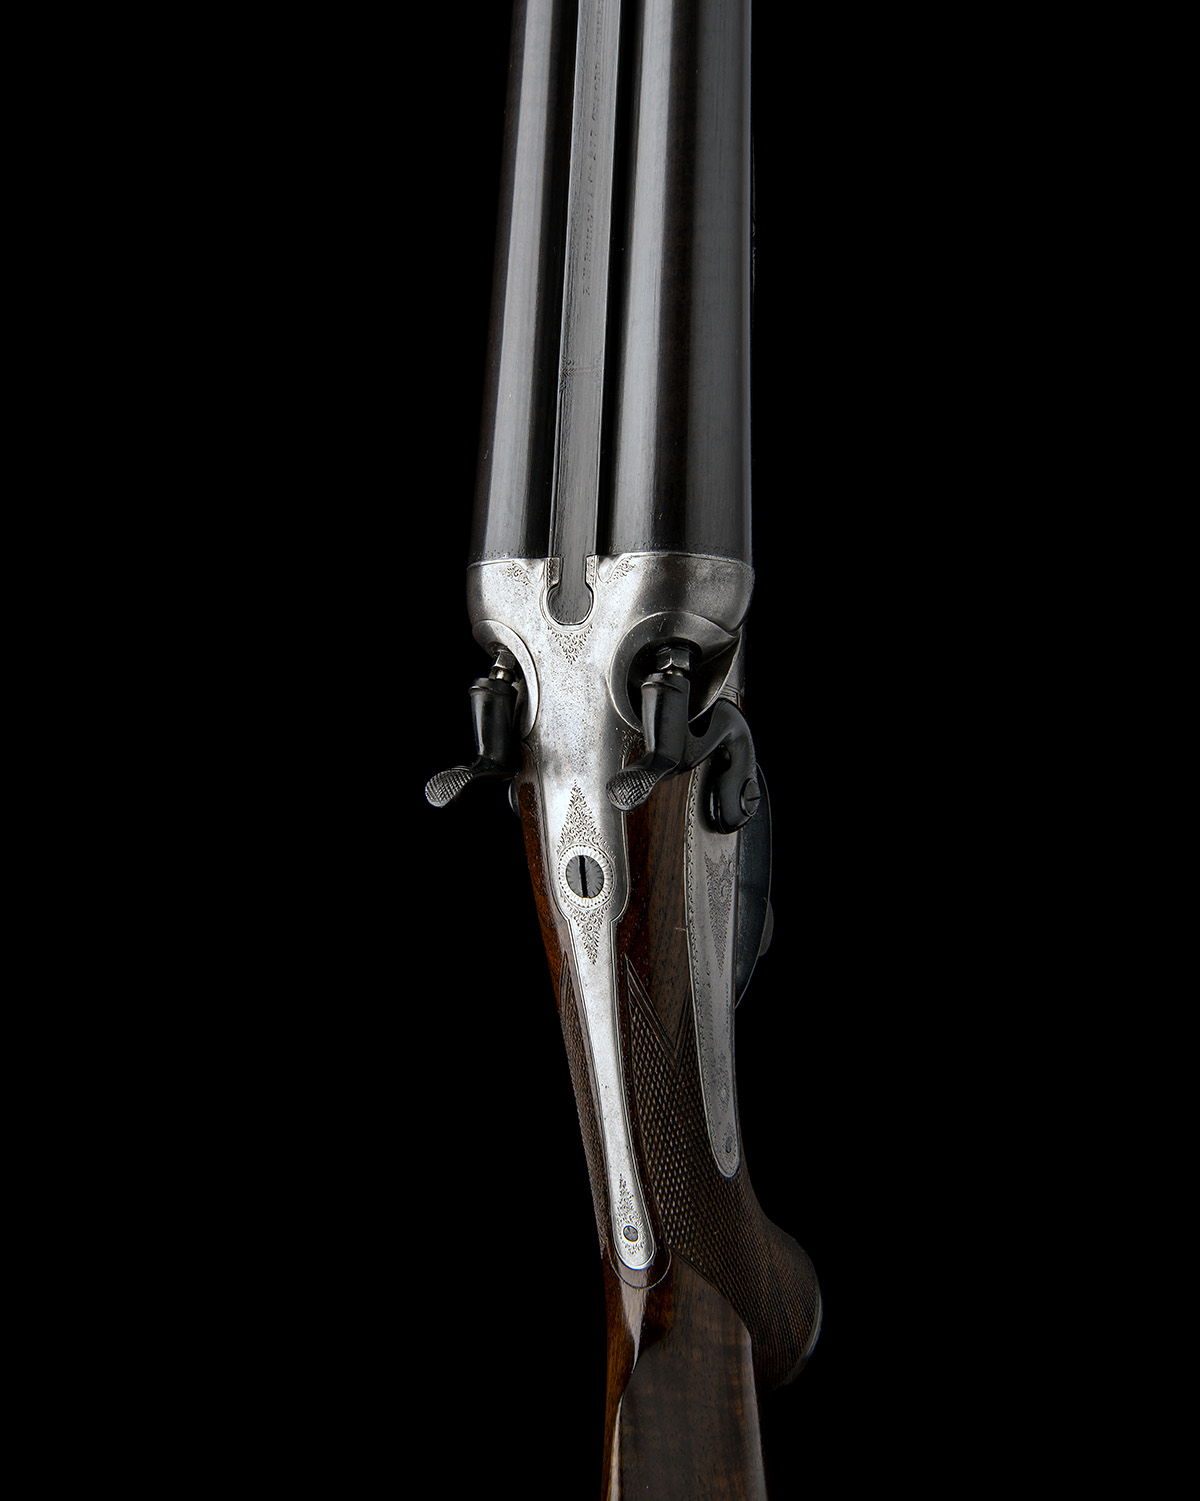 AN 8-BORE DOUBLE-BARRELLED ROTARY-UNDERLEVER HAMMERGUN SIGNED E.M. REILLY & CO., serial no. 33457, - Image 7 of 9